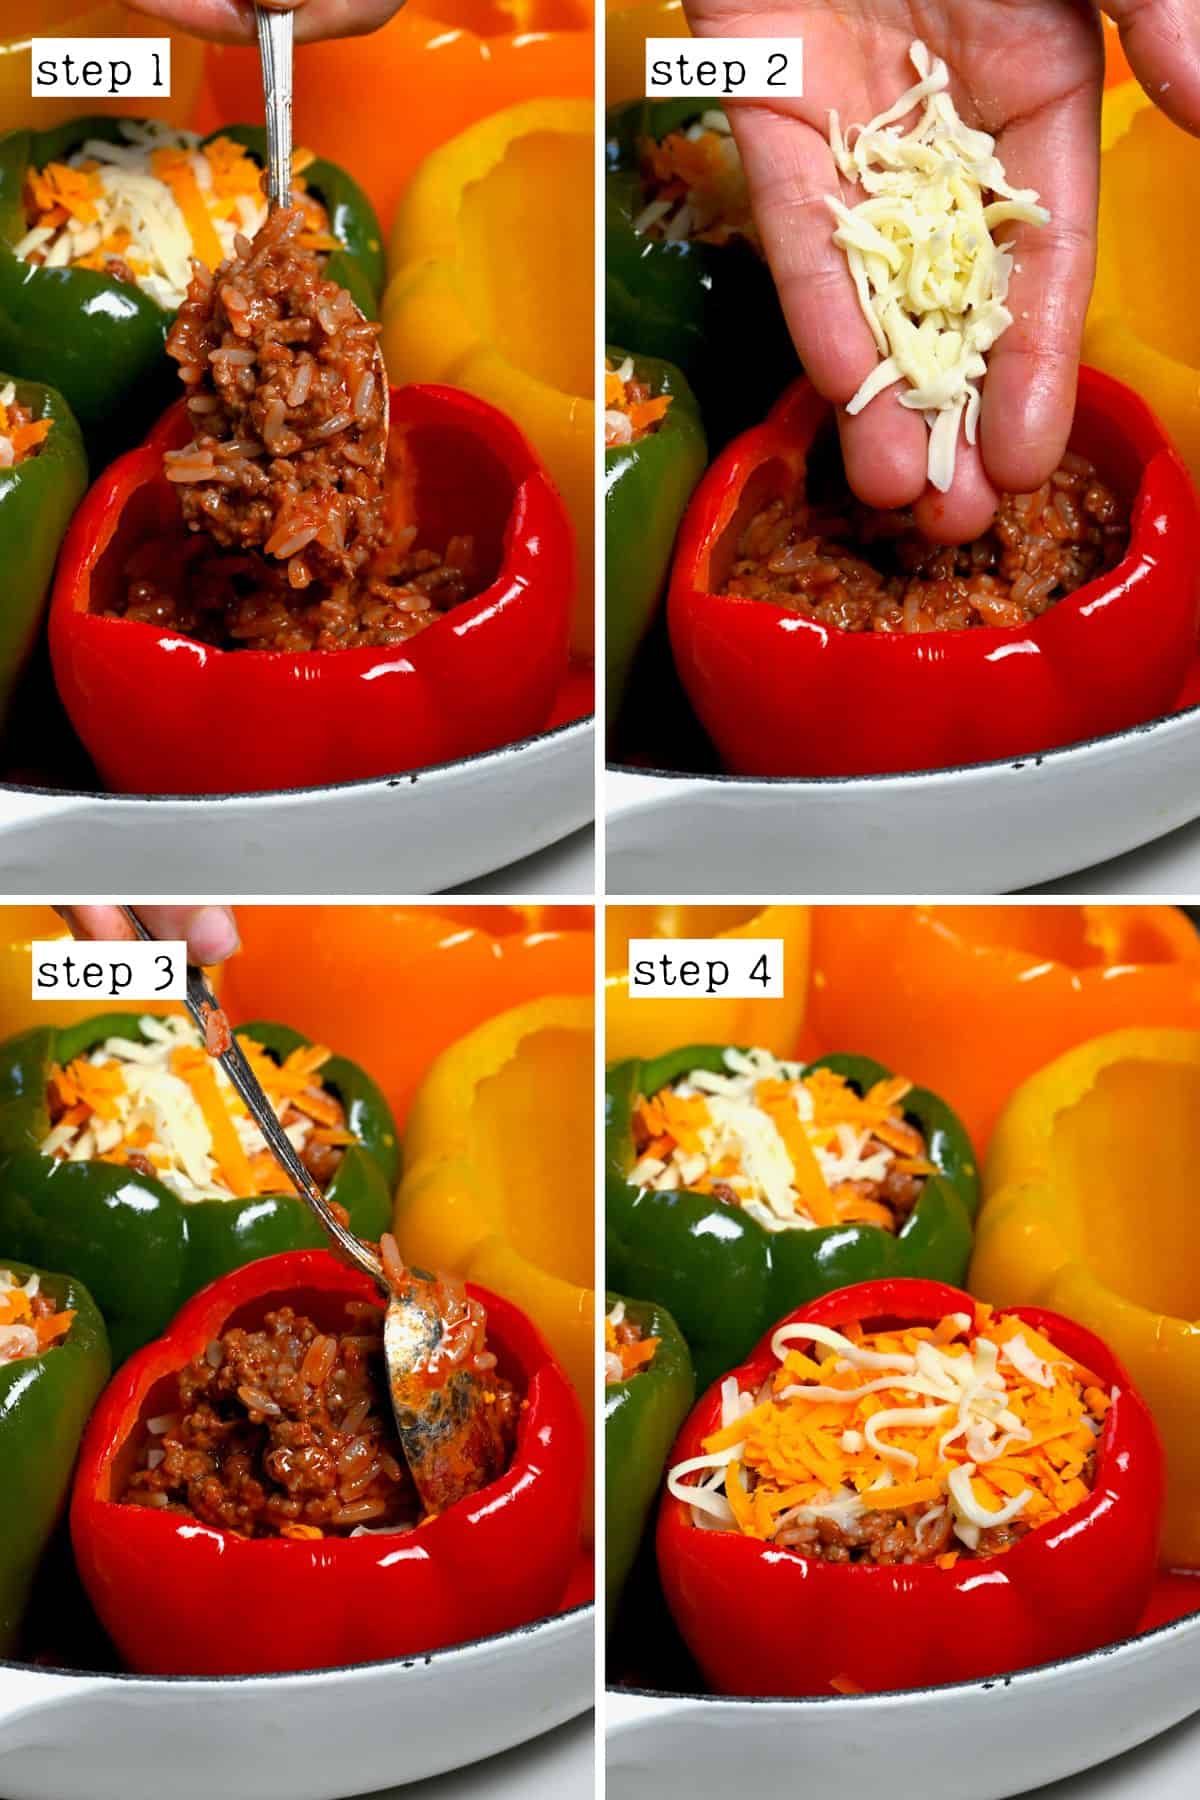 Steps for stuffing peppers